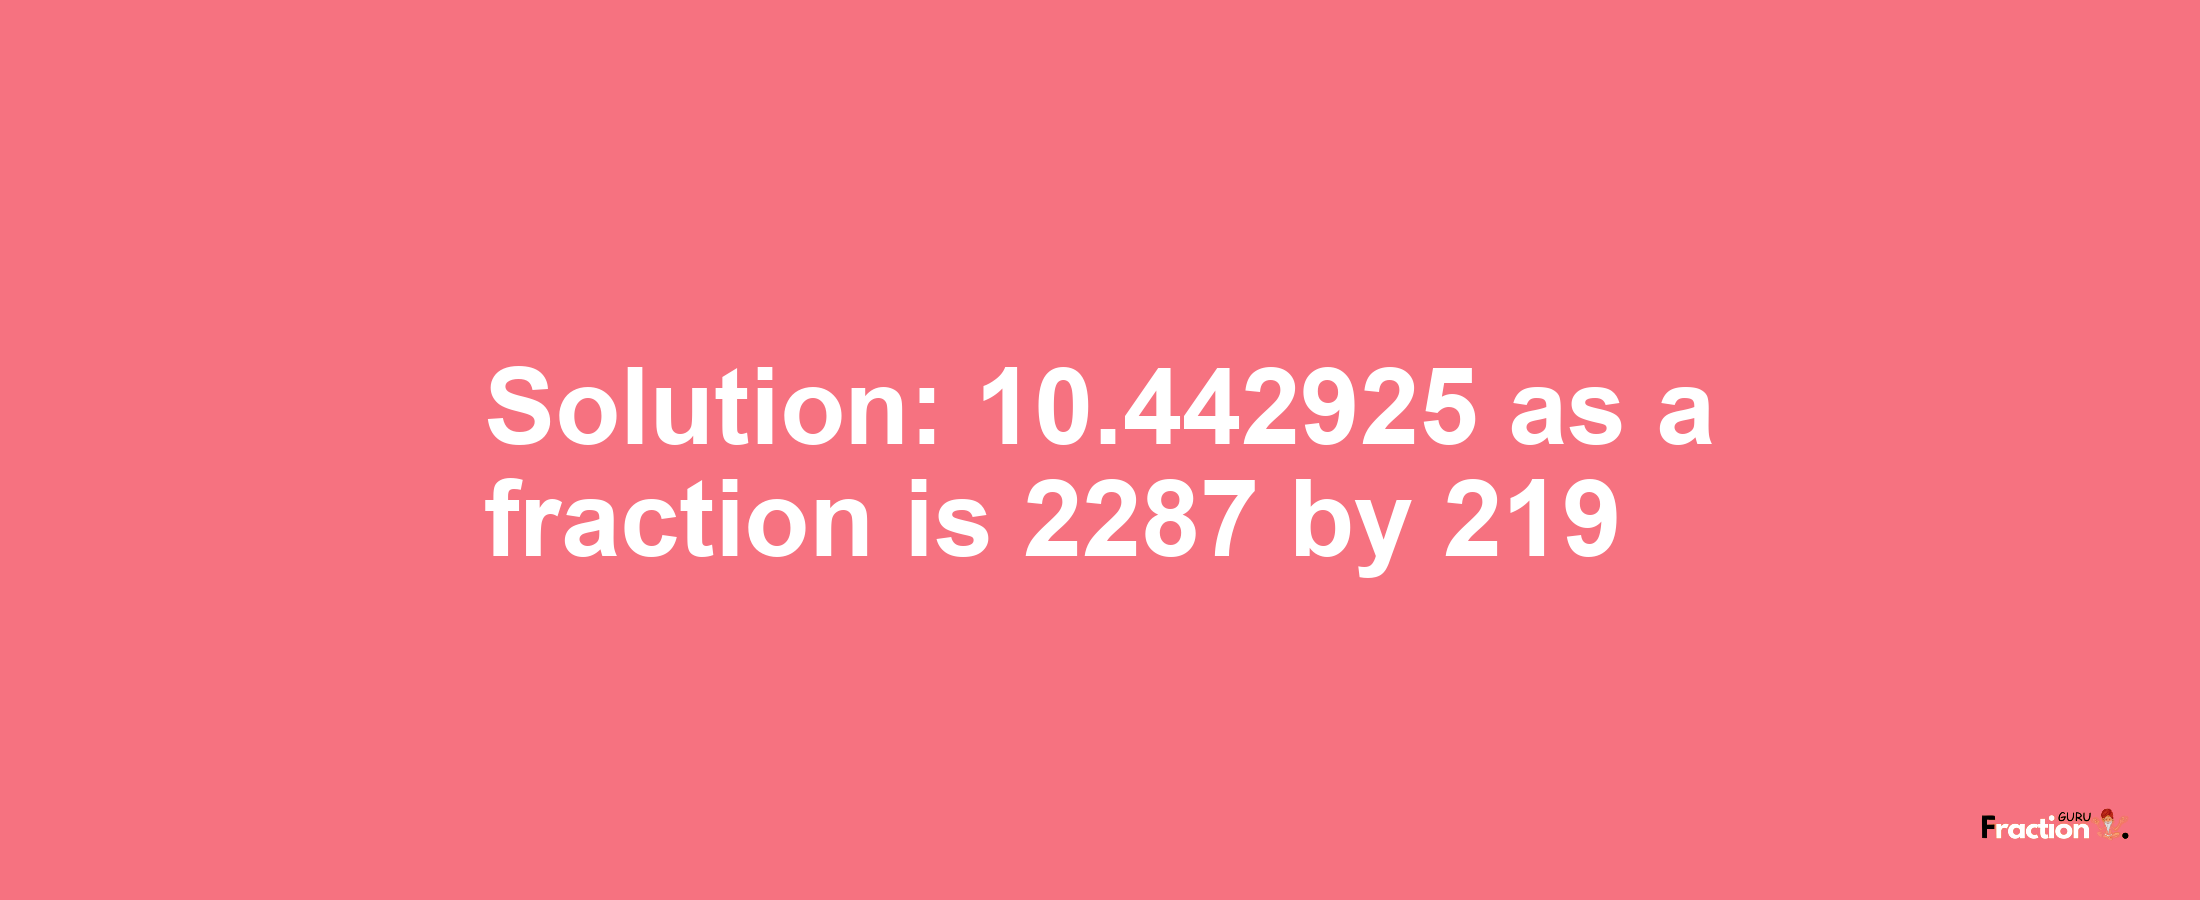 Solution:10.442925 as a fraction is 2287/219